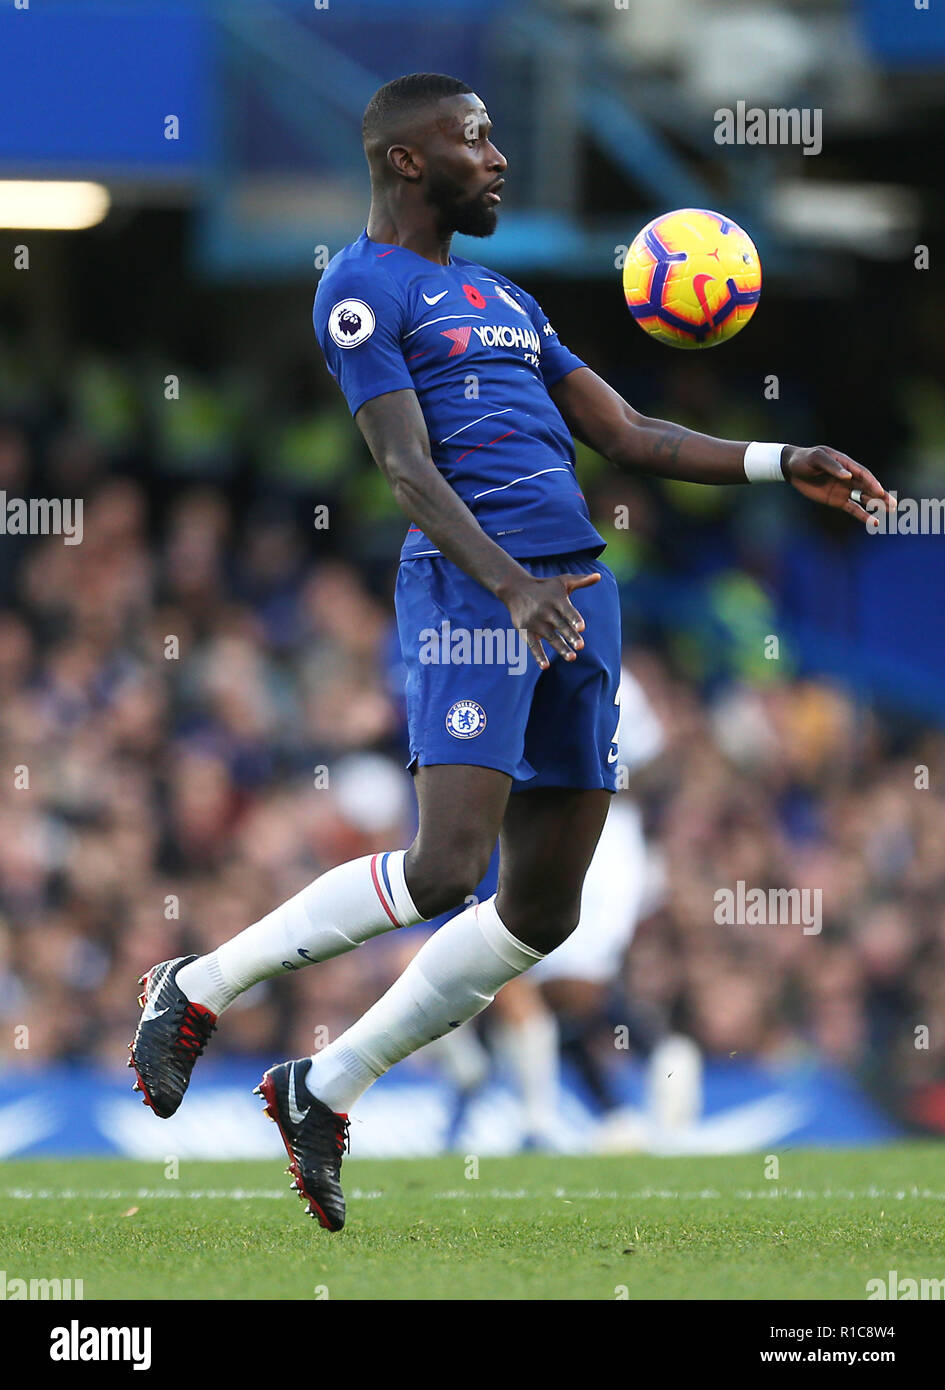 Chelsea's Antonio Rudiger in action during the Premier League match at Stamford Bridge, London. PRESS ASSOCIATION Photo. Picture date: Sunday November 11, 2018. See PA story SOCCER Chelsea. Photo credit should read: Steven Paston/PA Wire. RESTRICTIONS: No use with unauthorised audio, video, data, fixture lists, club/league logos or 'live' services. Online in-match use limited to 120 images, no video emulation. No use in betting, games or single club/league/player publications. Stock Photo